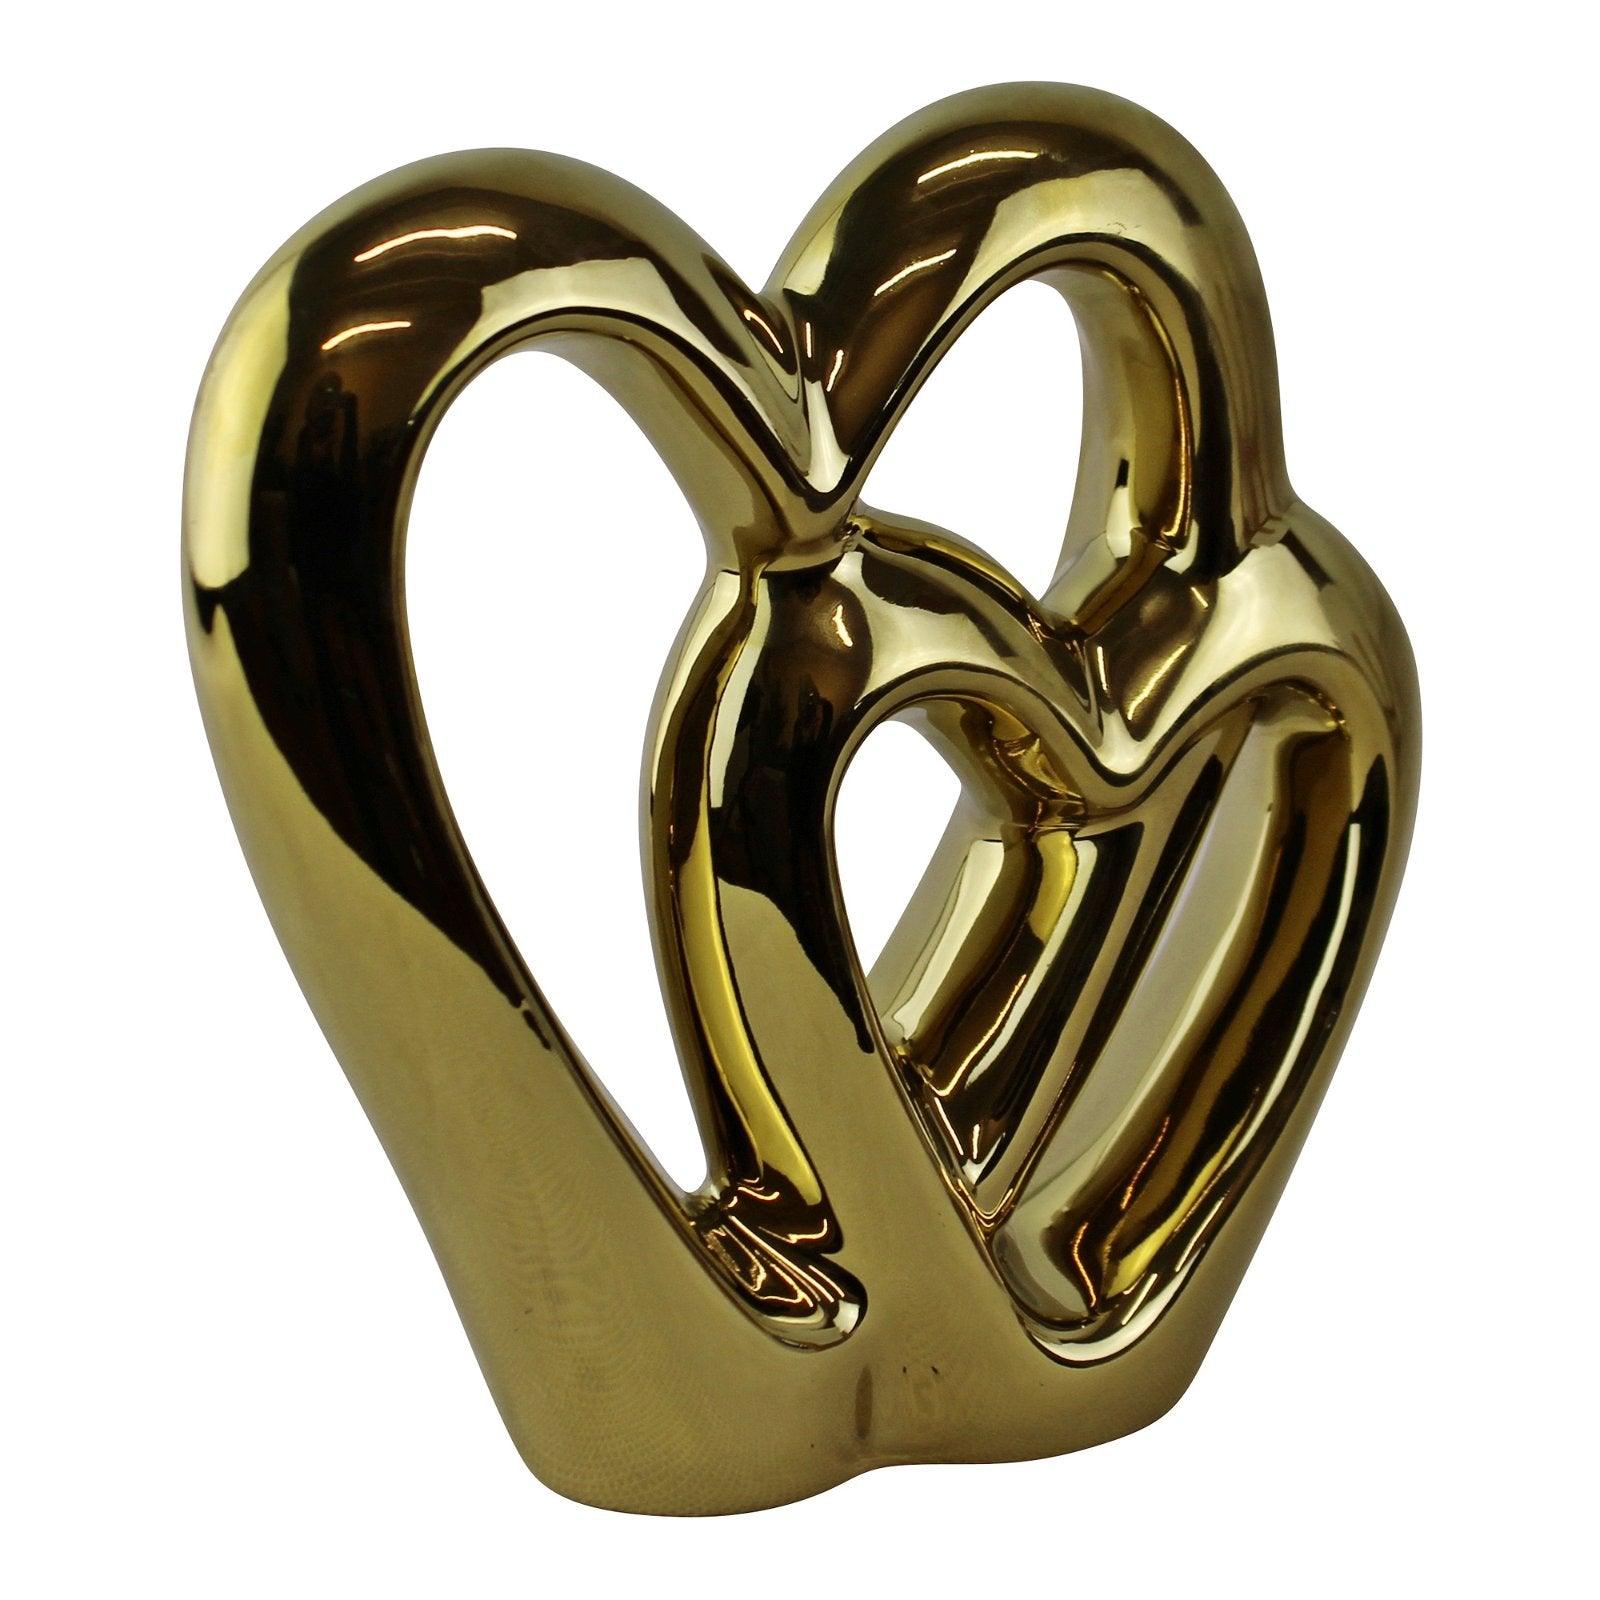 View Gold Double Heart Ornament 15cm information